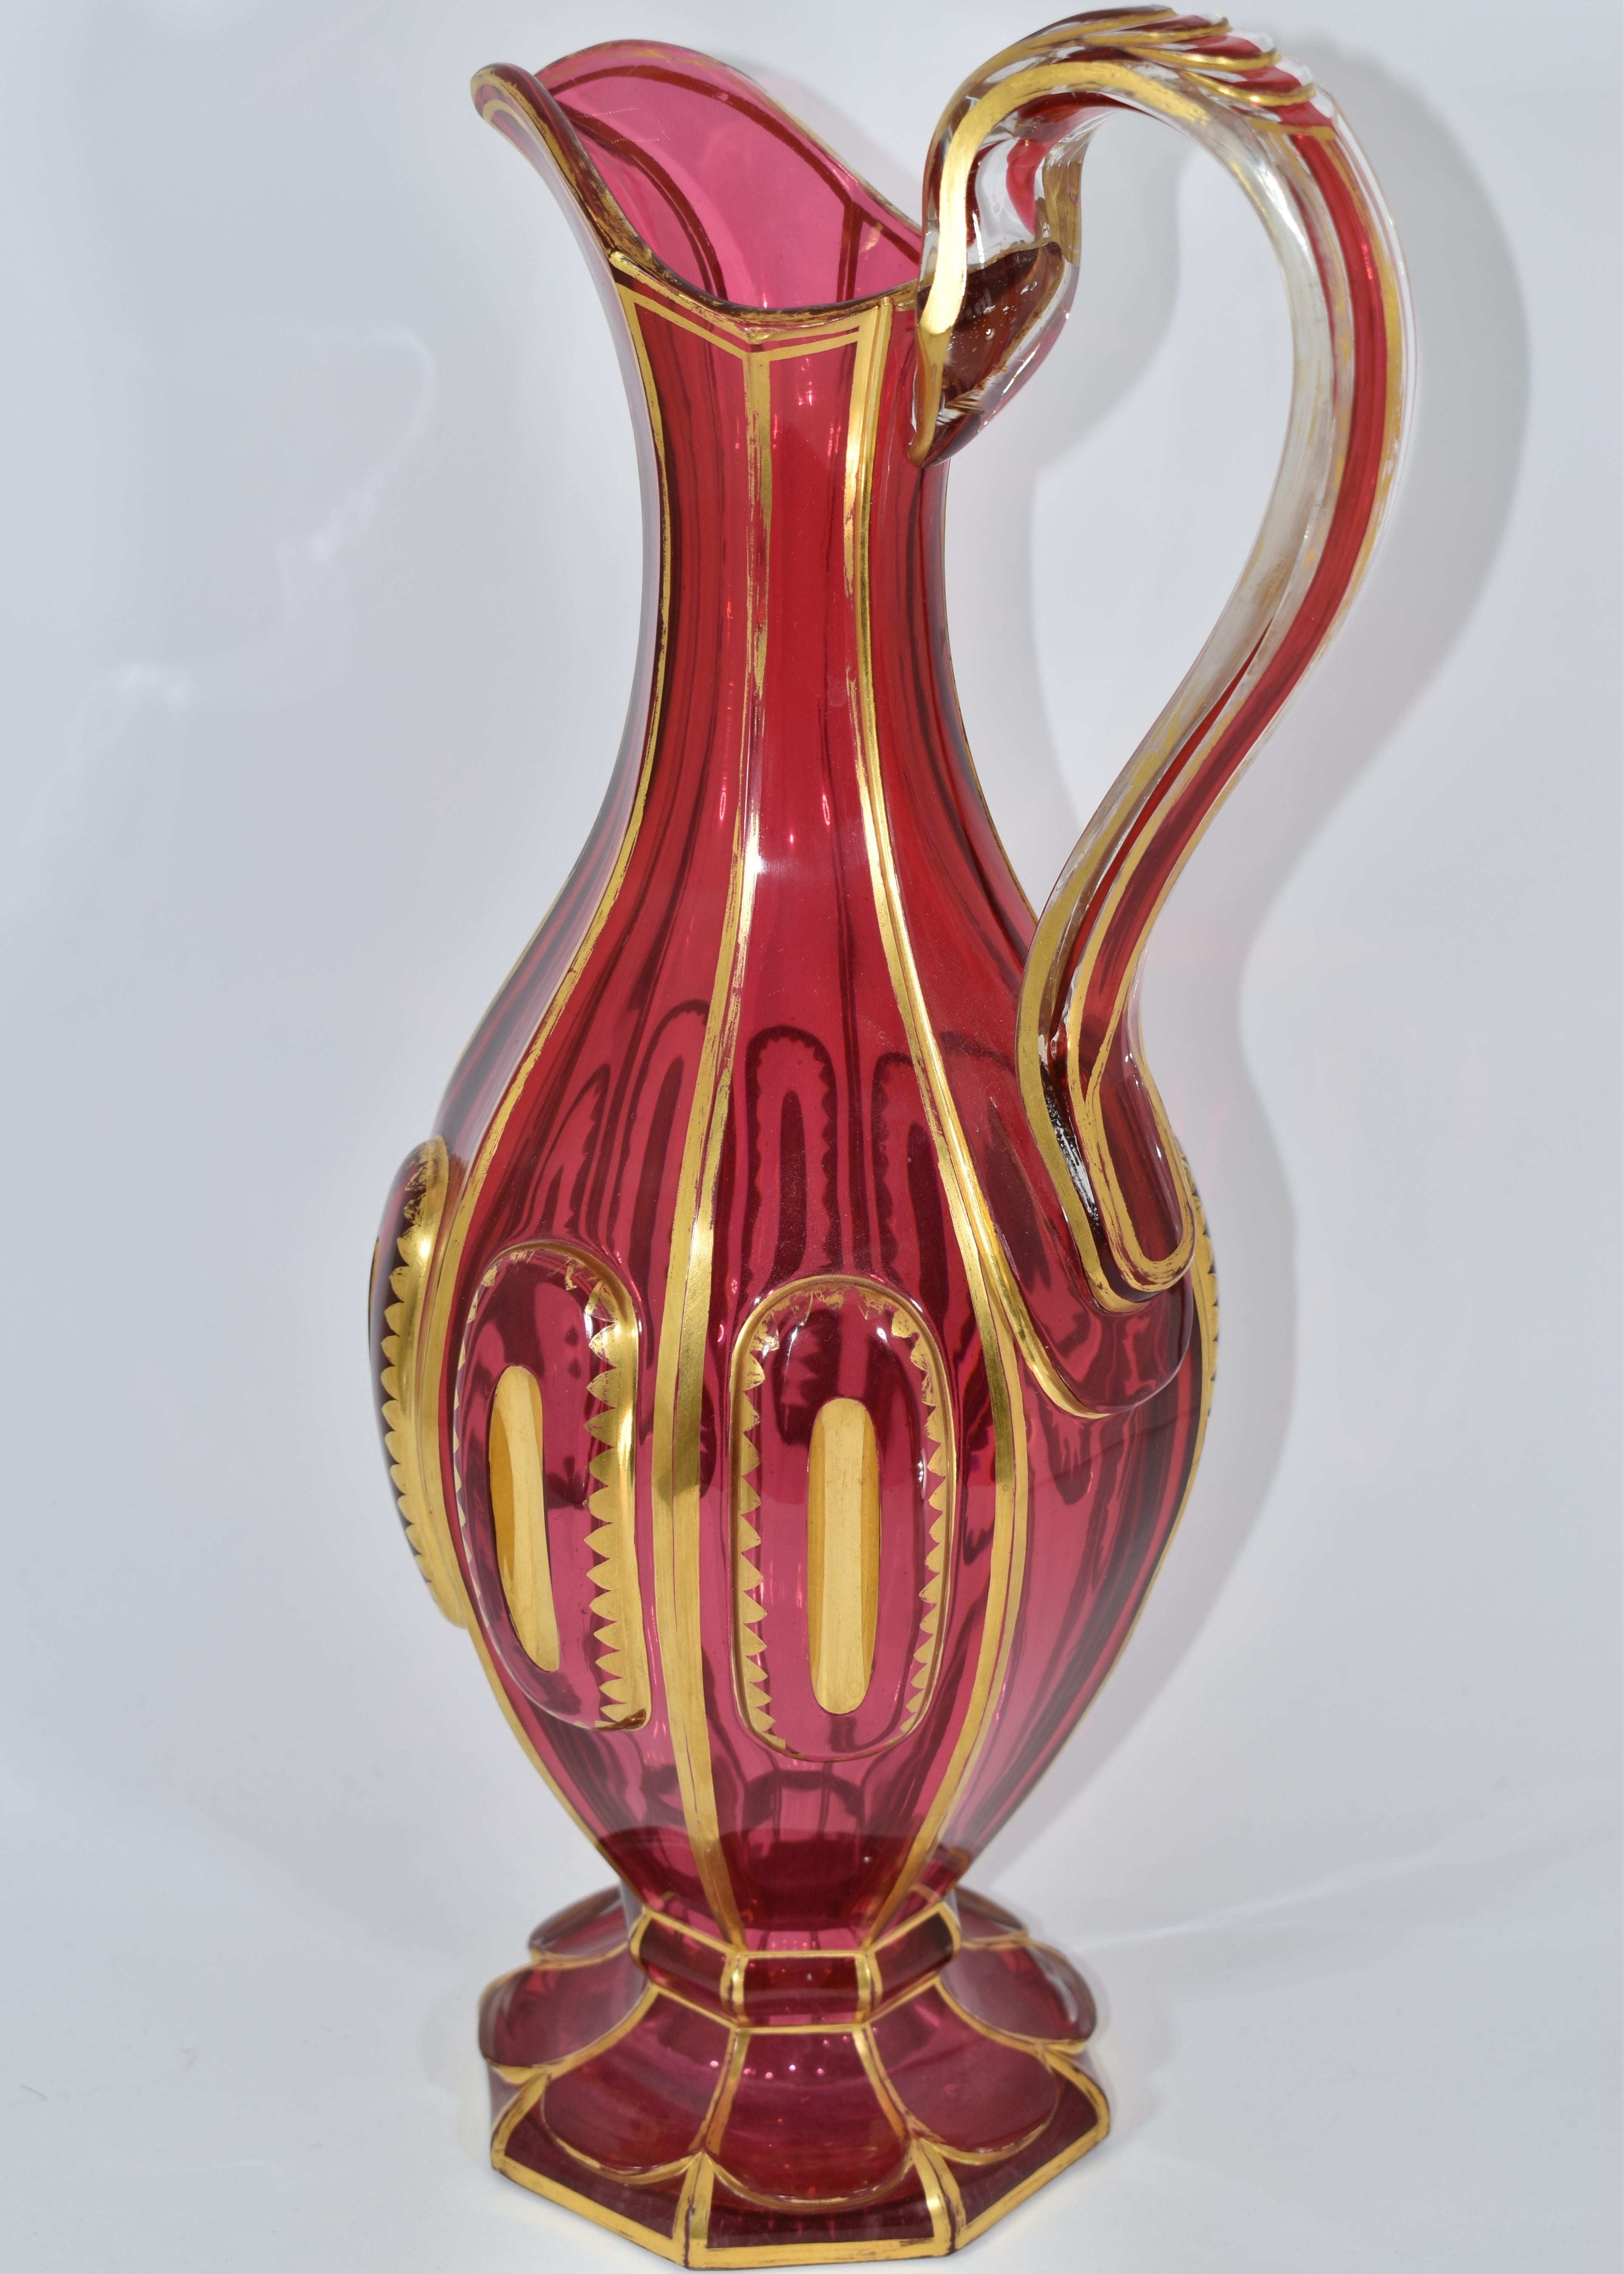 Large antique cranberry glass pitcher.
Bohemian, 19th Century
The circular body is cut in 8 side panels with decorations and gilding all around.
Height (35 cm)
Diameter (15 cm).